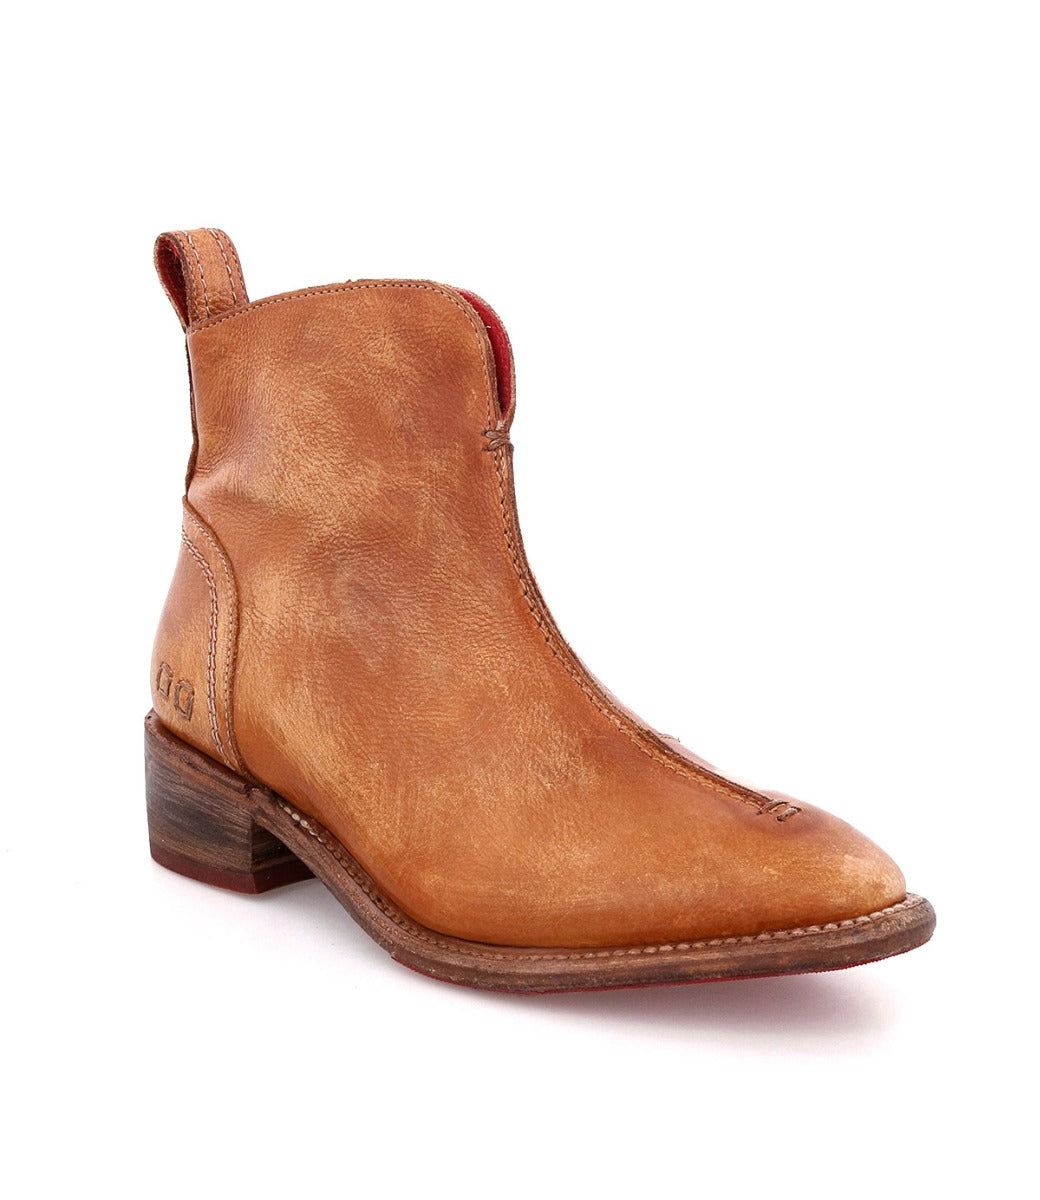 A women's Tan leather Tabitha ankle boot by Bed Stu.